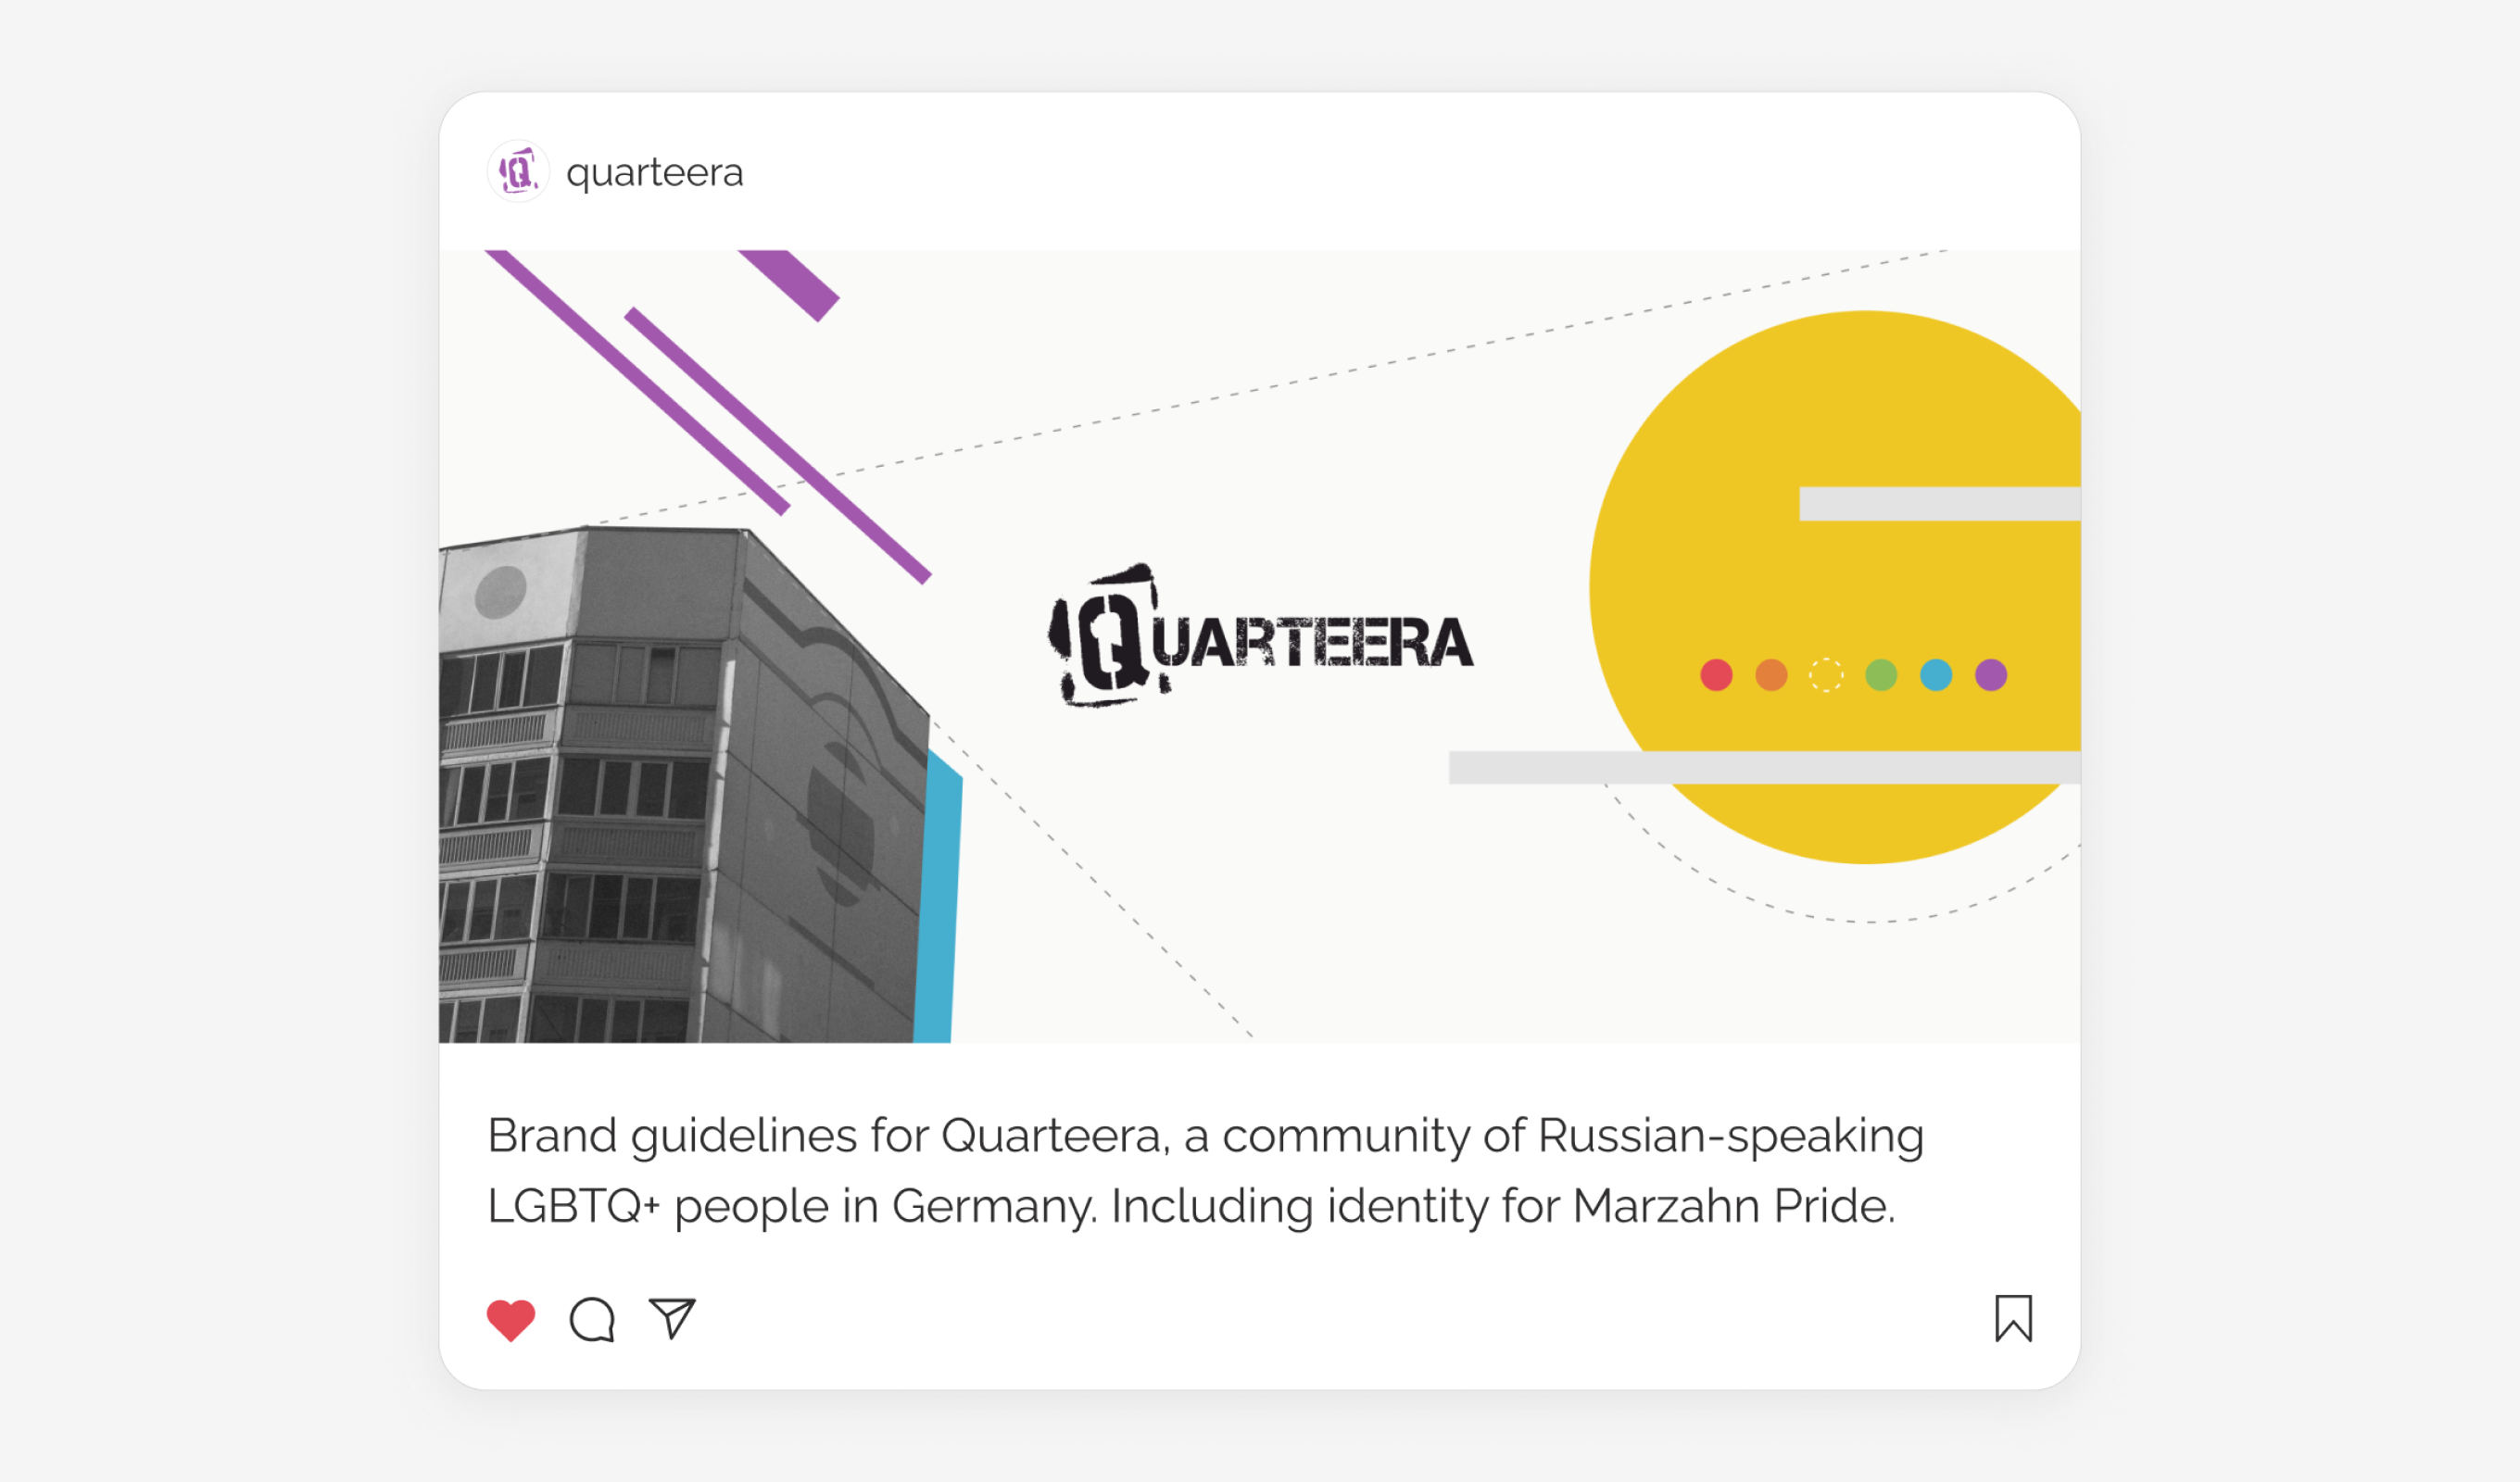 Brand guidelines for quarteera, a community of Russian-speaking LGBTQ+ community in Germany. Including identity for Marzahn Pride.